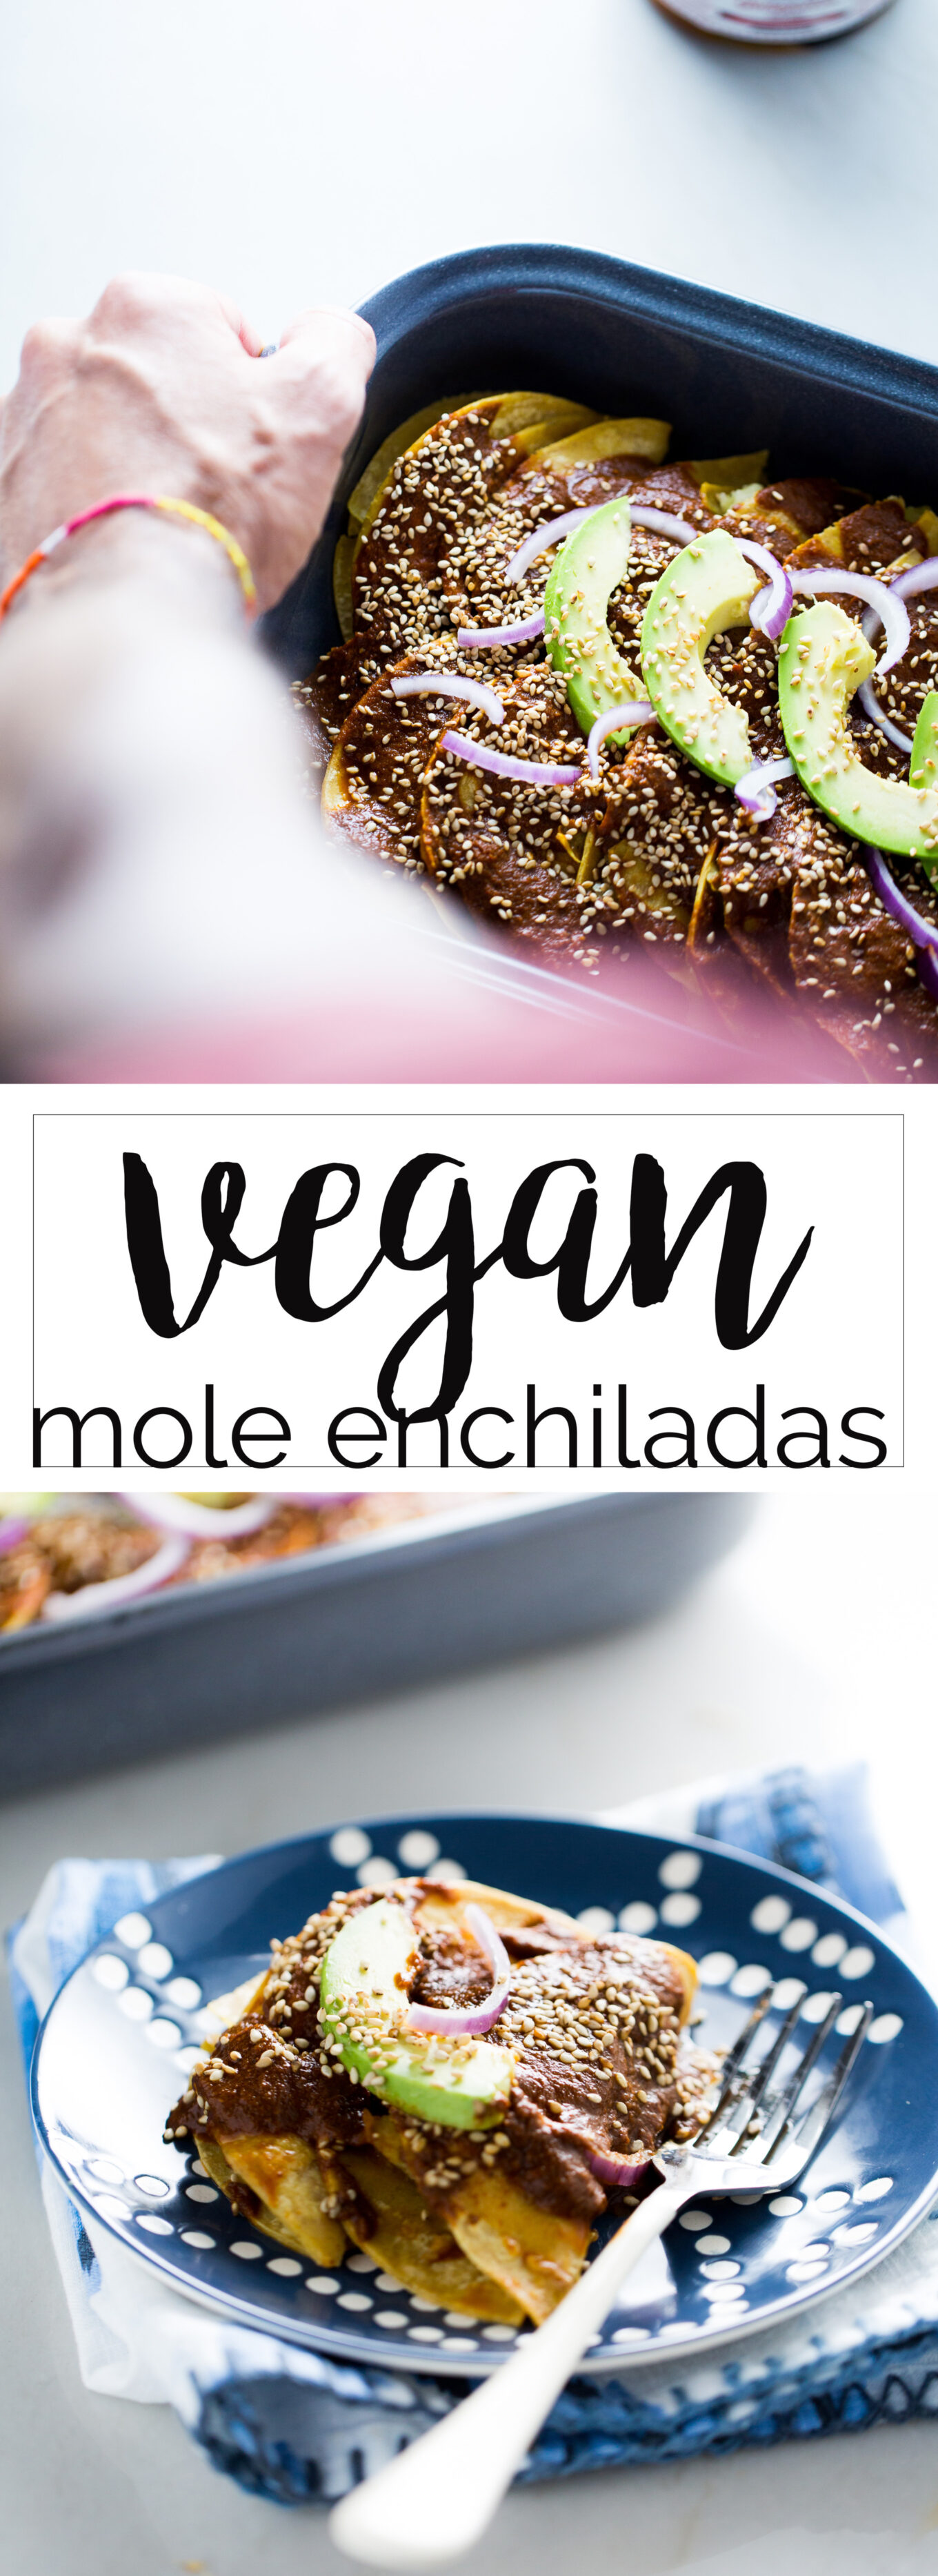 This is the best recipe for vegan mole enchiladas. This recipe is authentic Mexican.